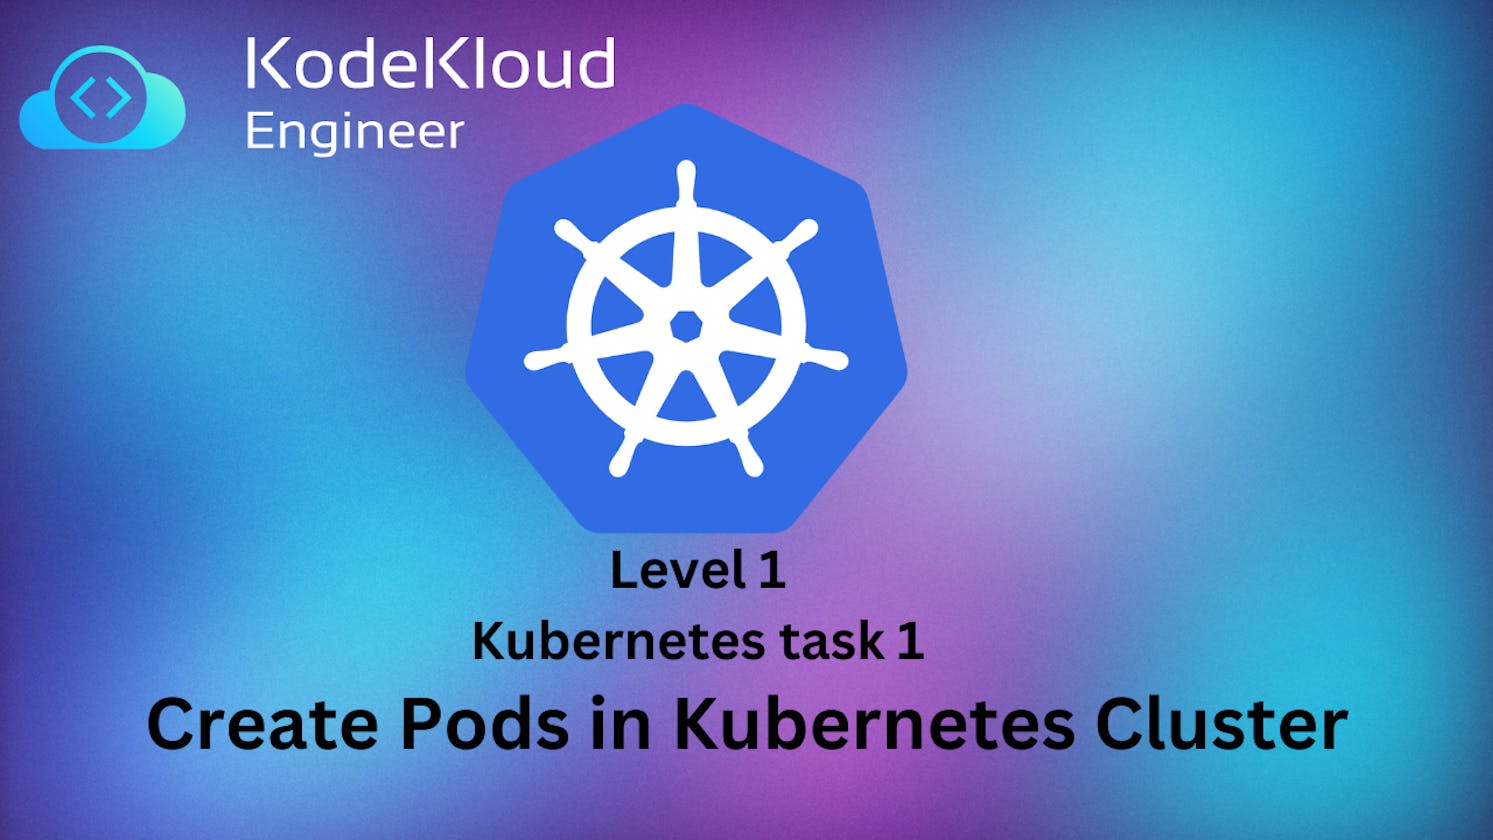 Step by step approach of Kubernetes task on creating a Pod by the KodeKloud Engineer Program: